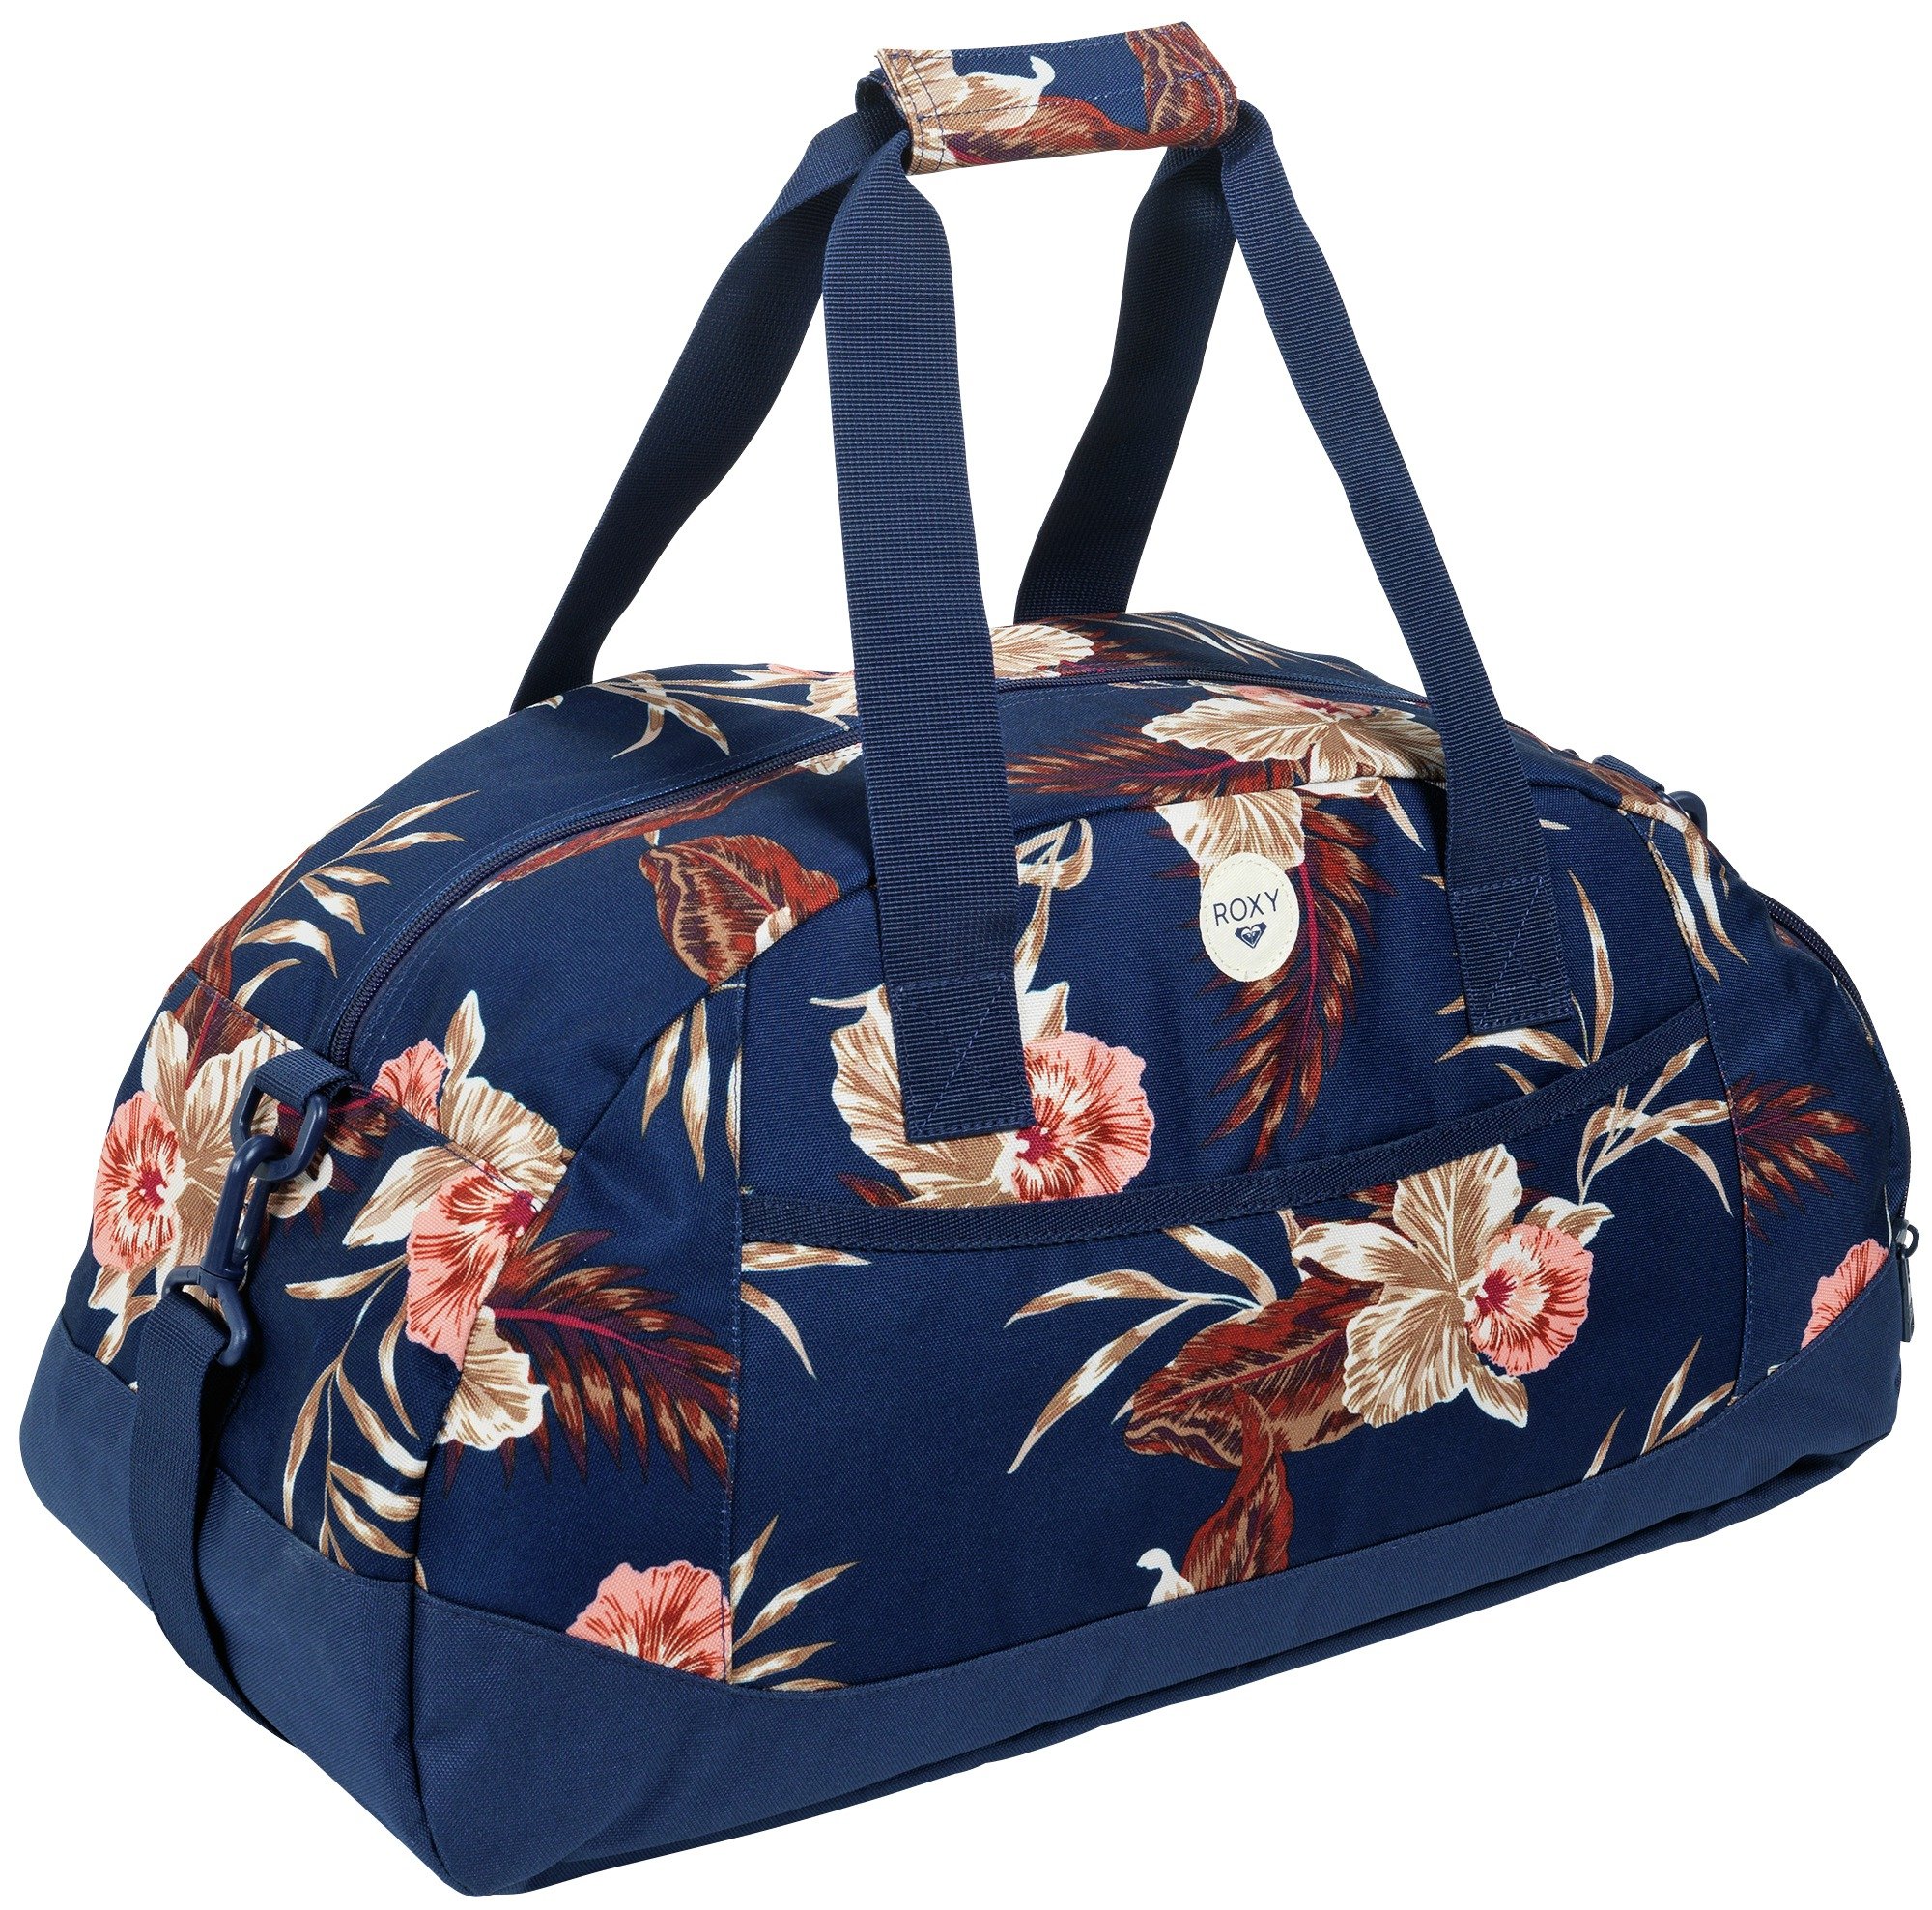 Roxy Floral Holdall Bag - Small. Review